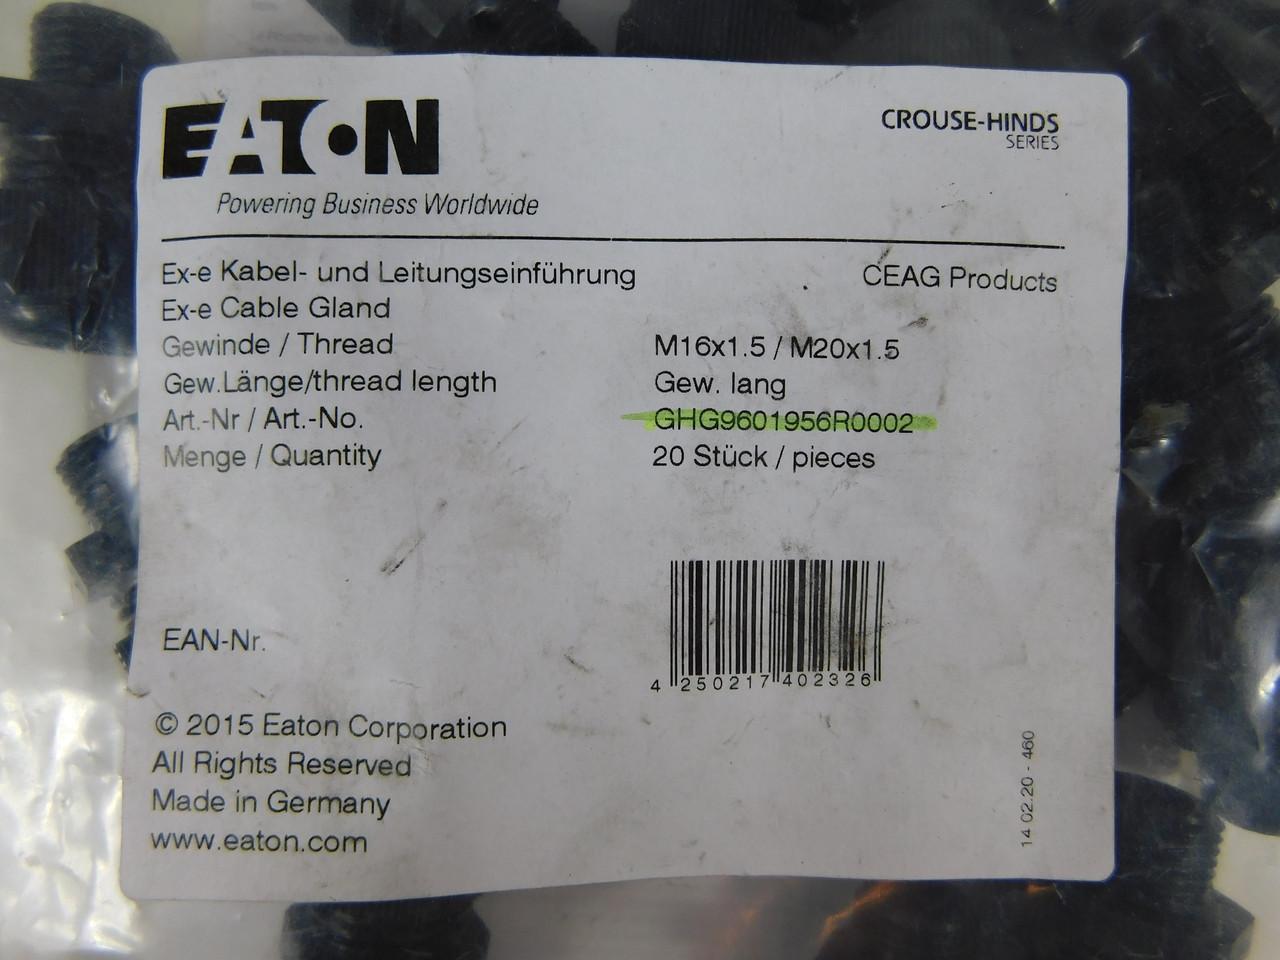 Eaton GHG9601956R0002 Eaton GHG9601956R0002 Misc. Cable and Wire Accessories Cable Gland